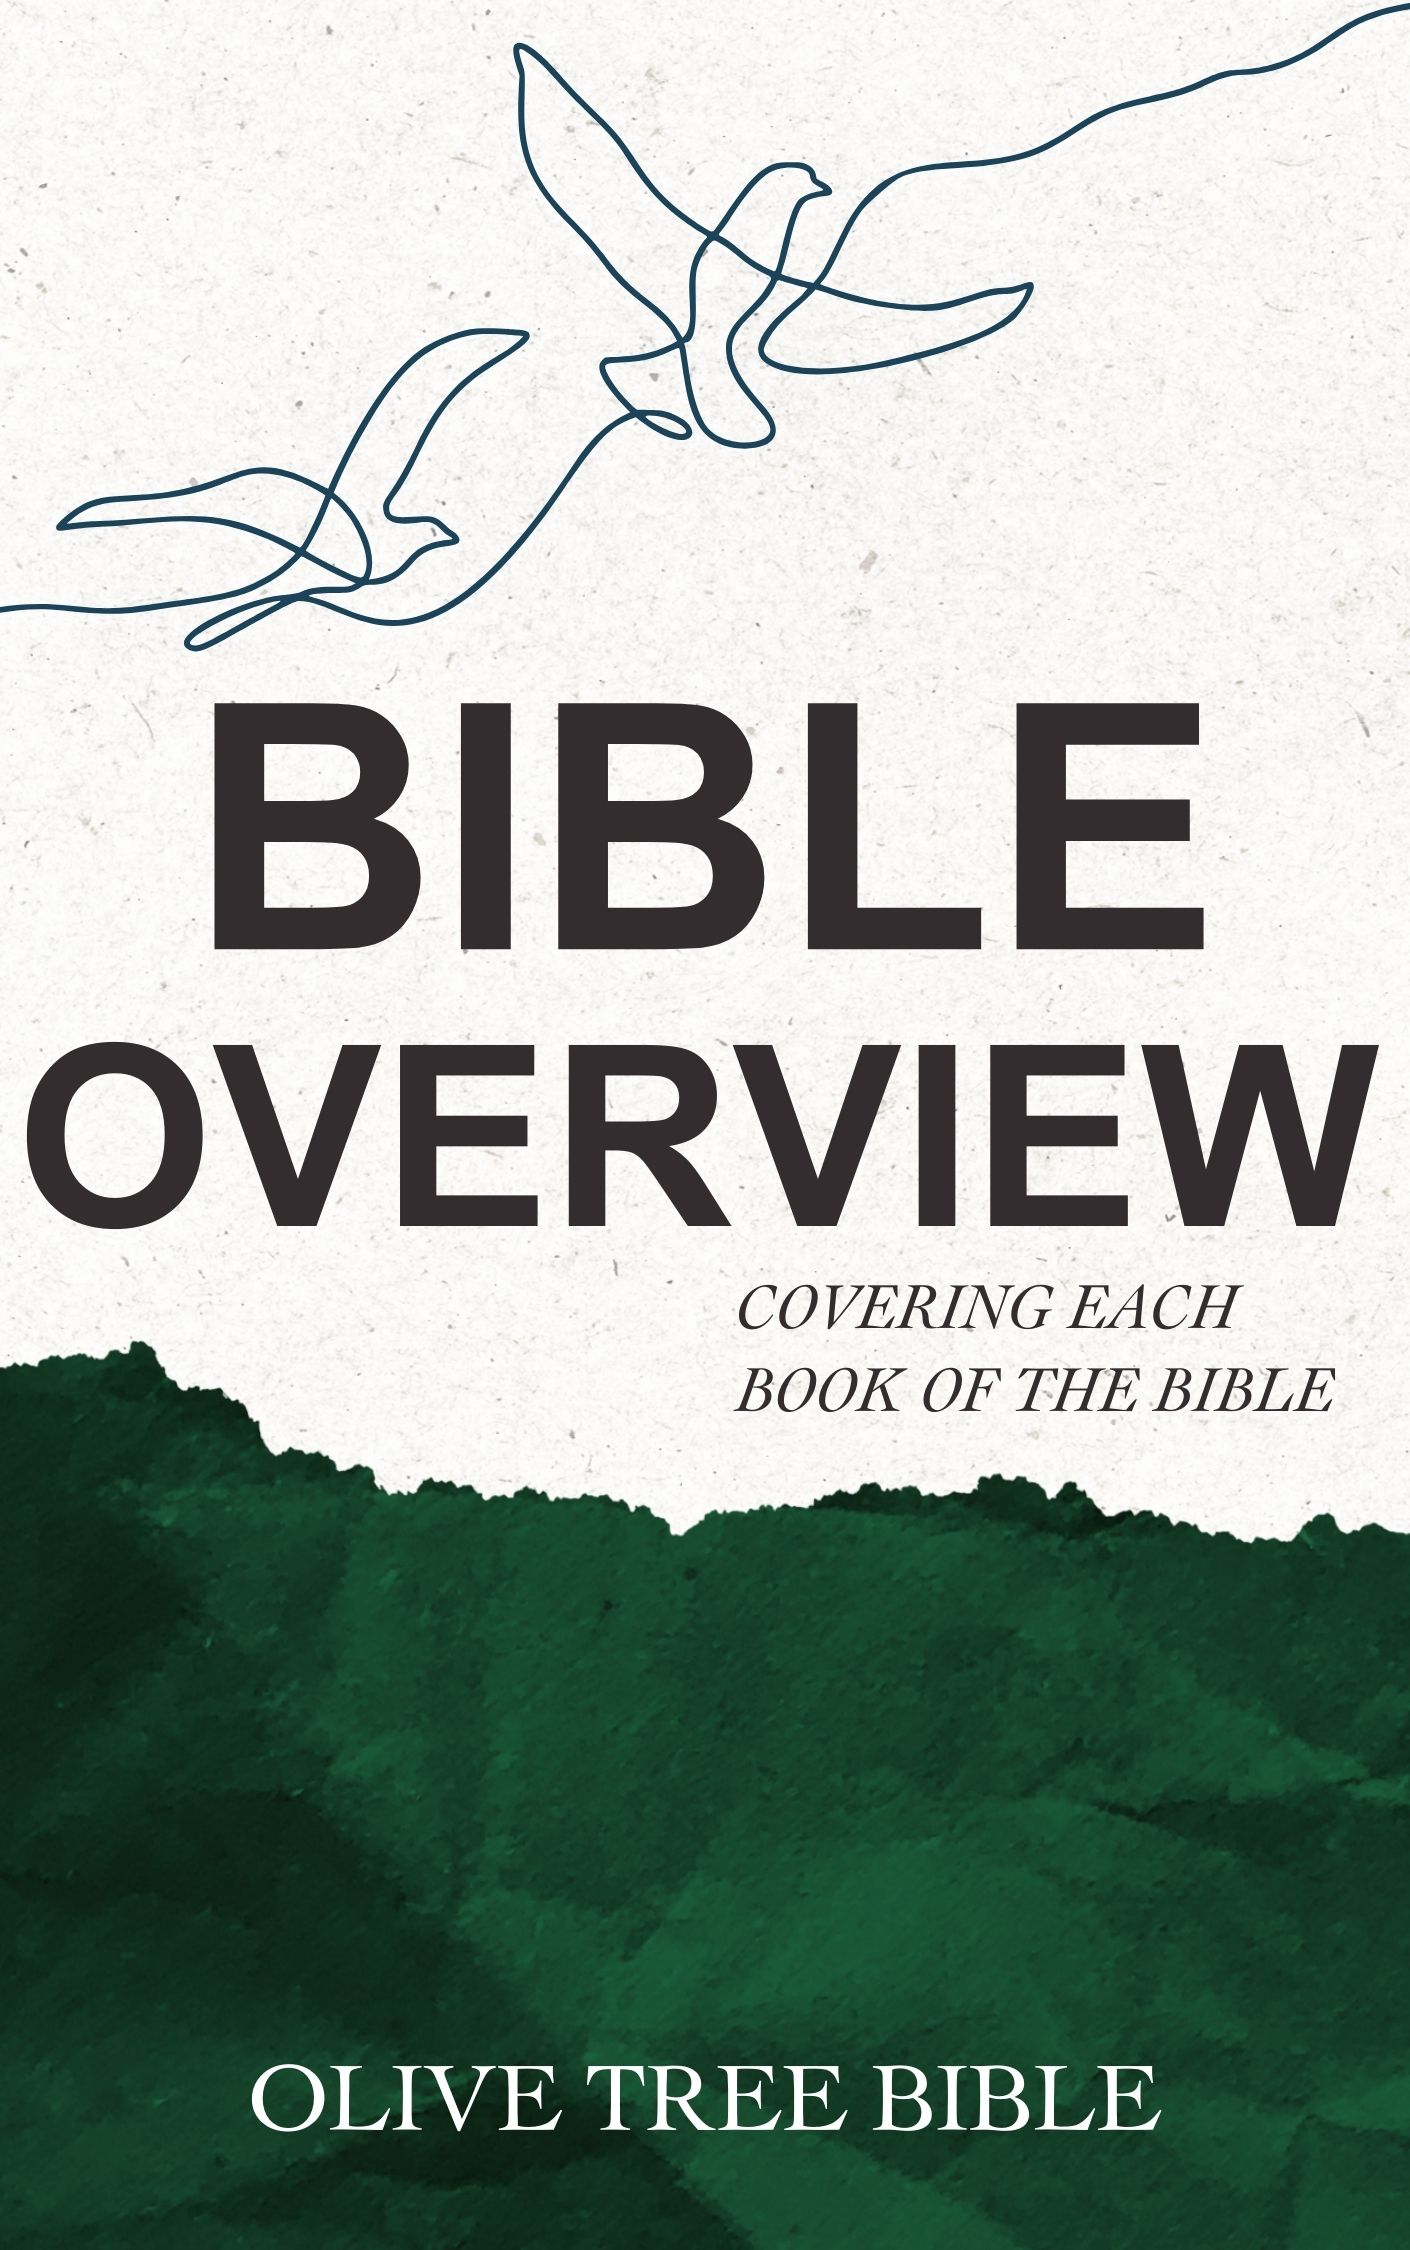 Olive Tree Bible Overview By Olive Tree For The Olive Tree Bible App 